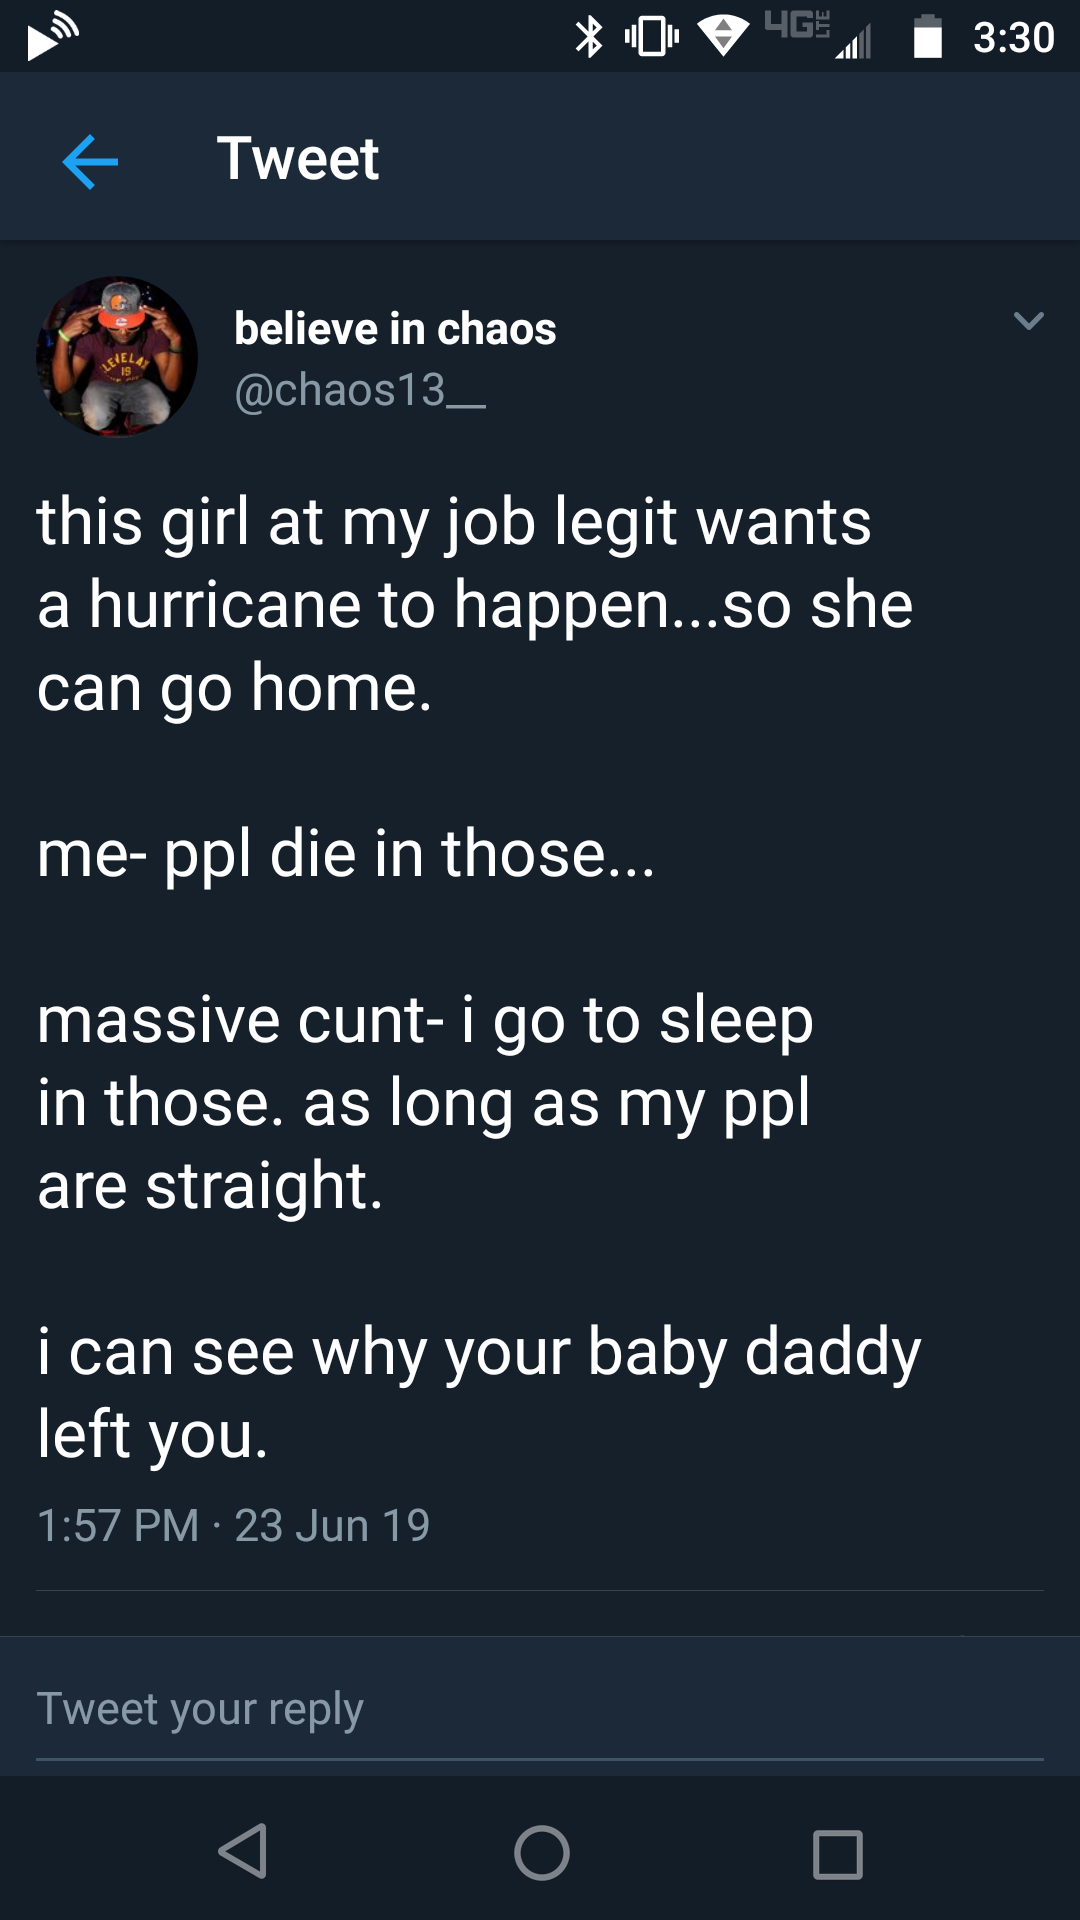 black twitter - Tweet believe in chaos this girl at my job legit wants a hurricane to happen...so she can go home. me ppl die in those... massive cunt i go to sleep in those. as long as my ppl are straight. i can see why your baby daddy left you.